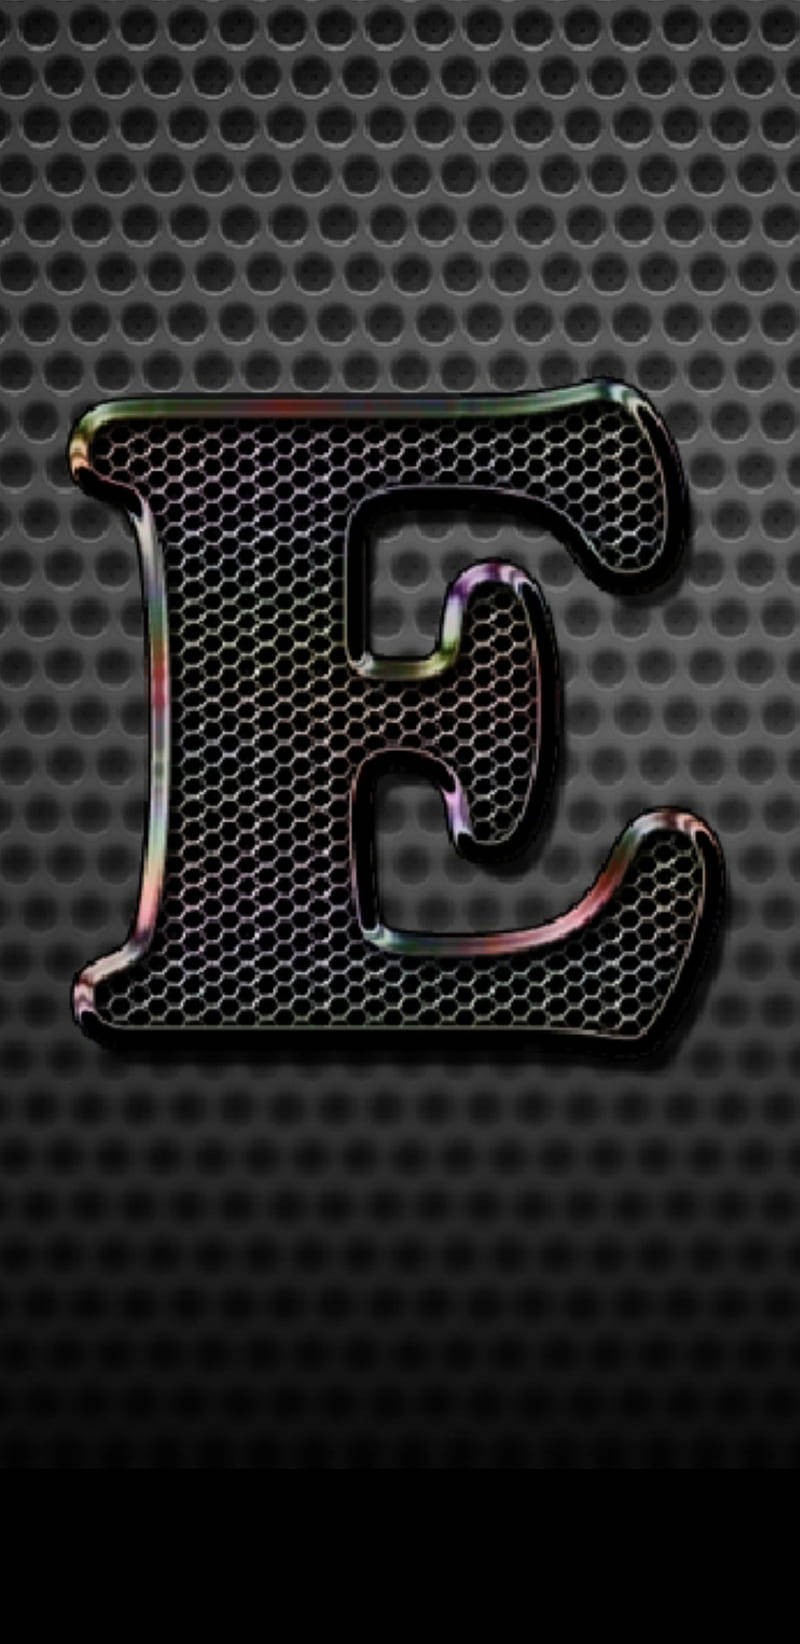 Metal Mesh Forming The Letter E